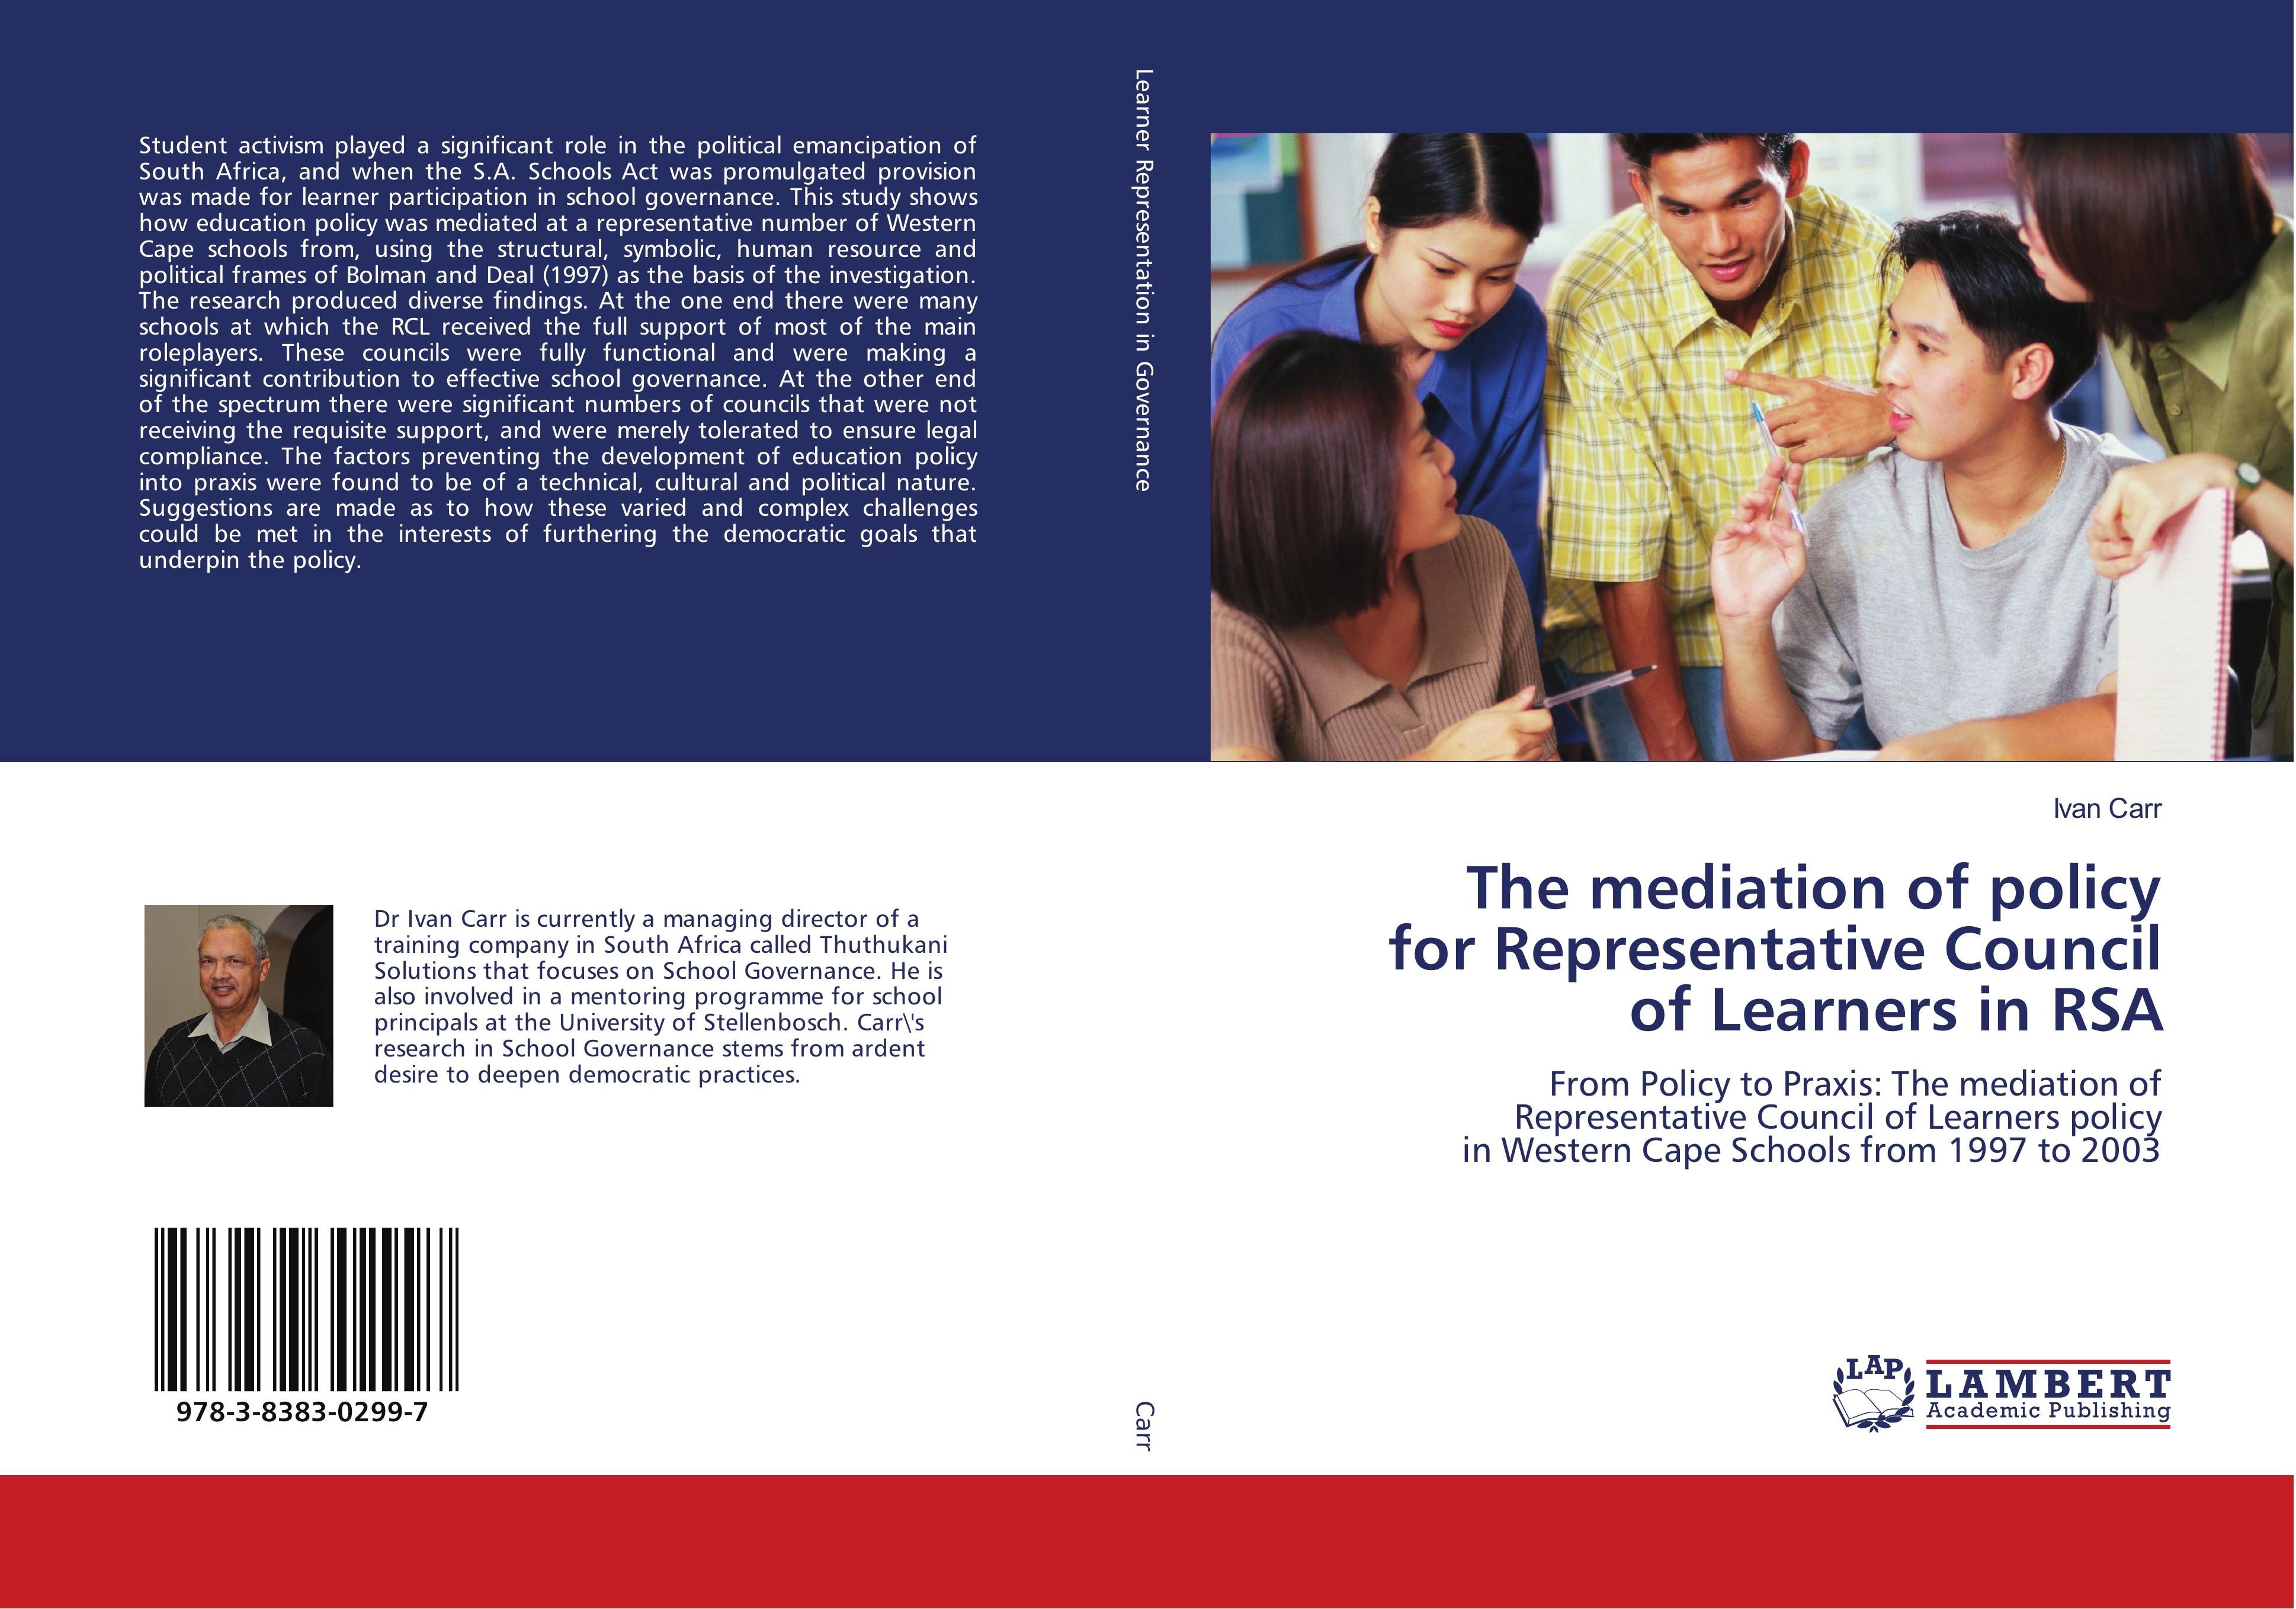 The mediation of policy for Representative Council of Learners in RSA - Ivan Carr